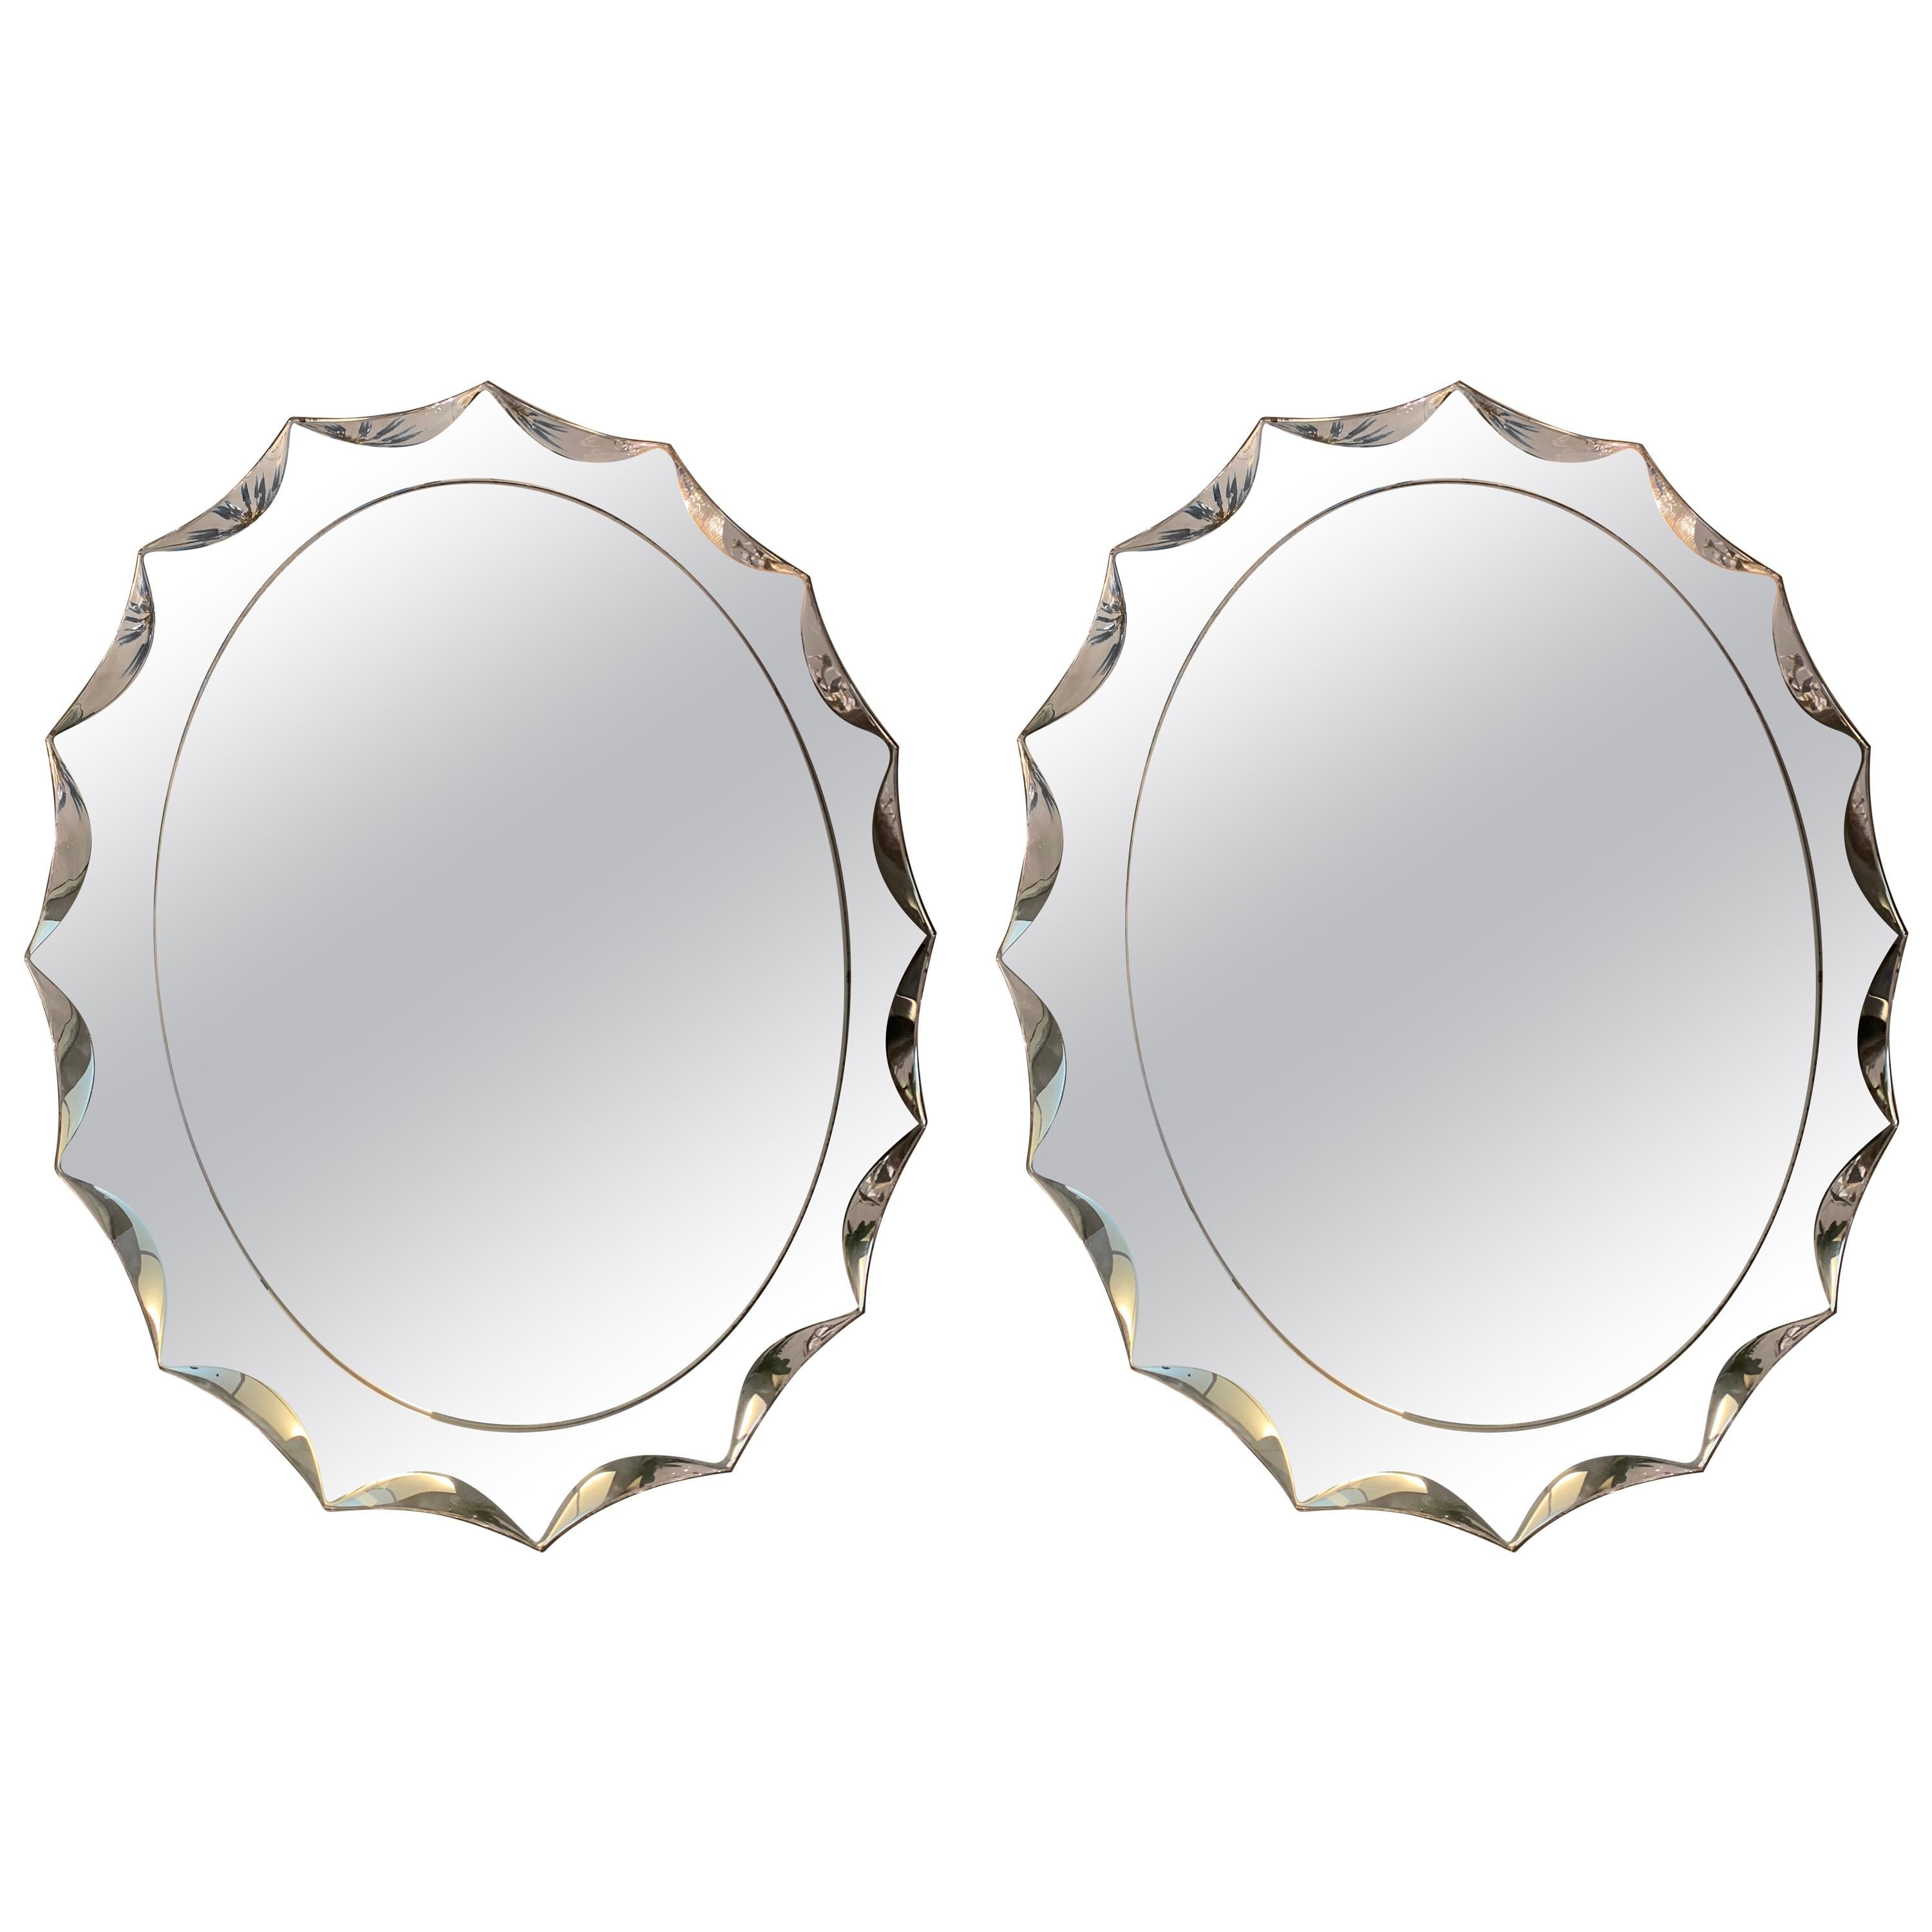 Pair of Italian Vintage Oval Mirrors with Ground Beleved Mirror Frame, 1970s